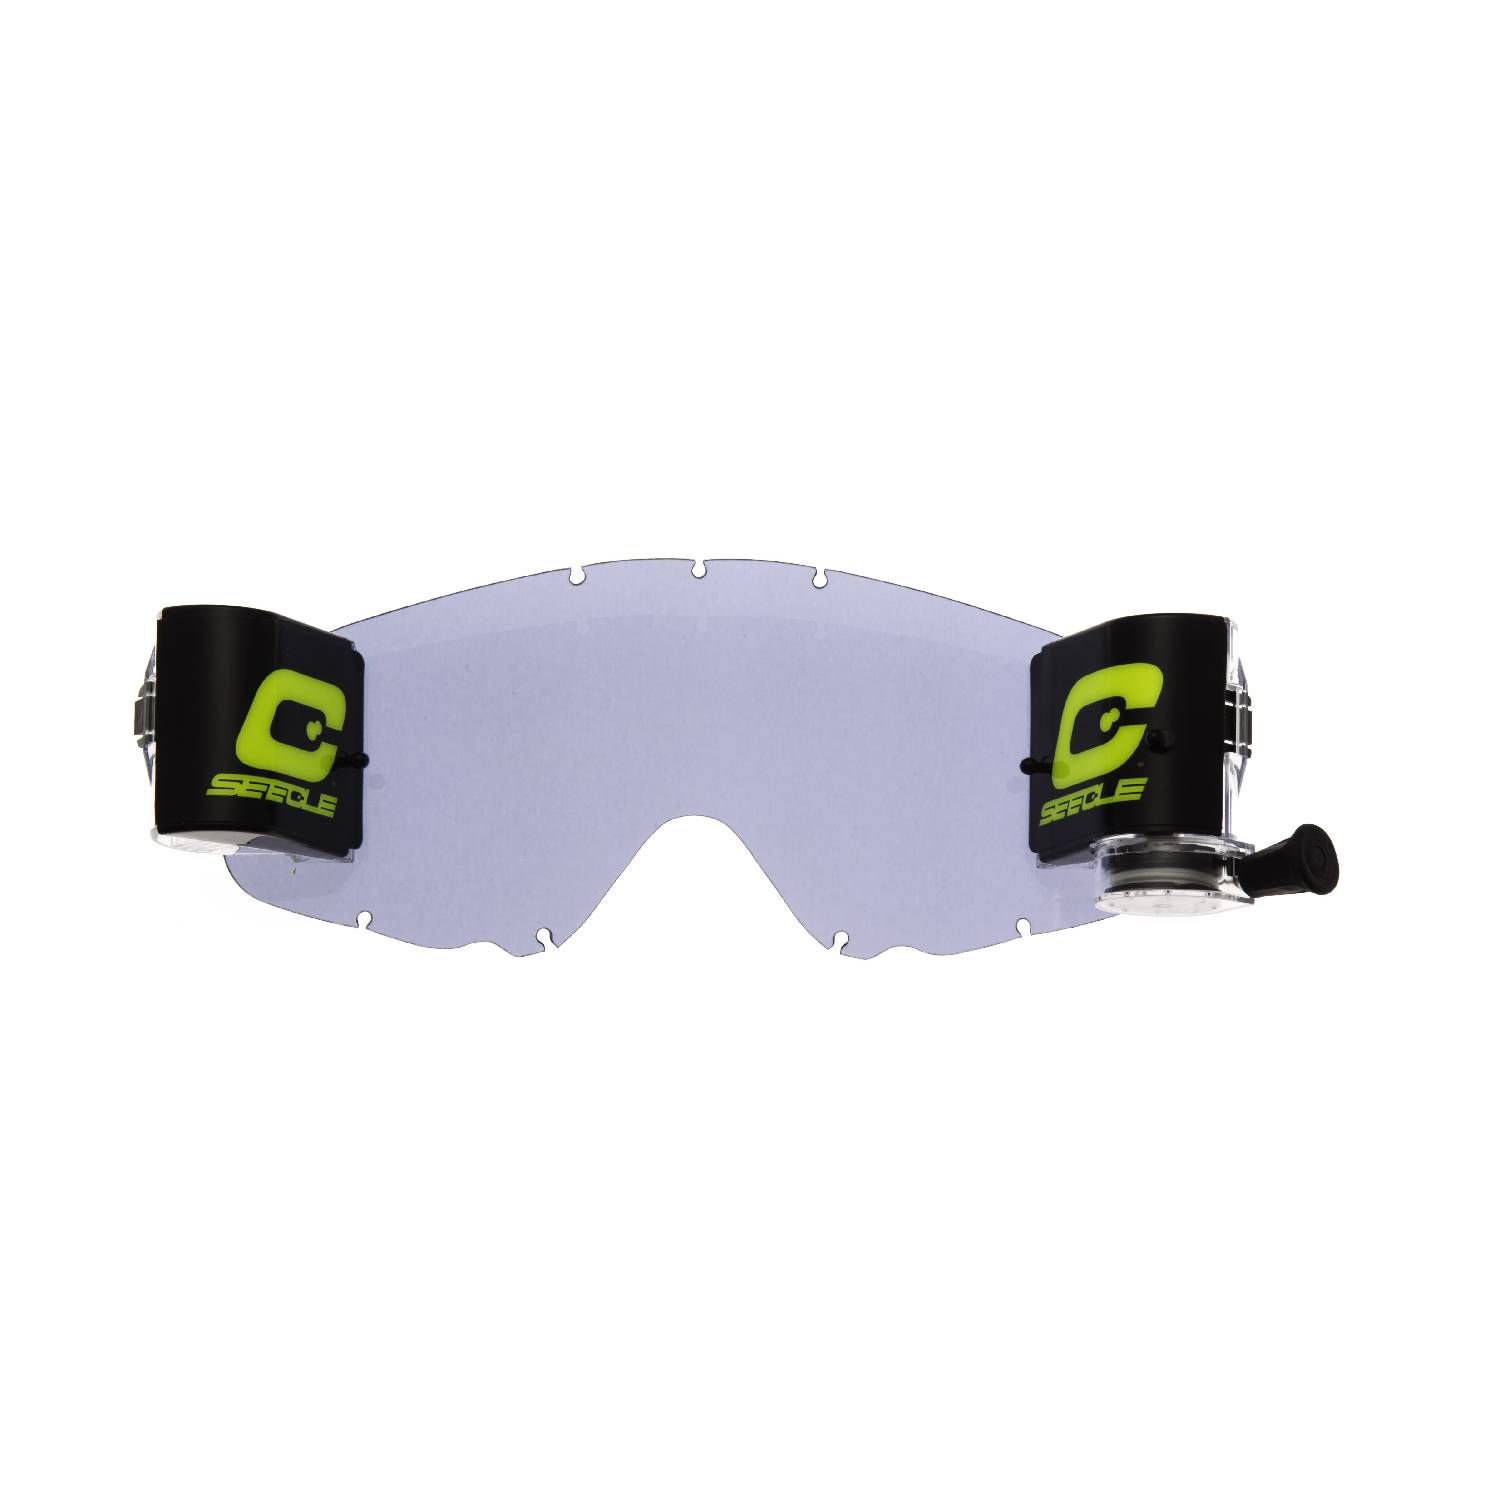 mud device kit smokey compatible for Oakley Crowbar goggle